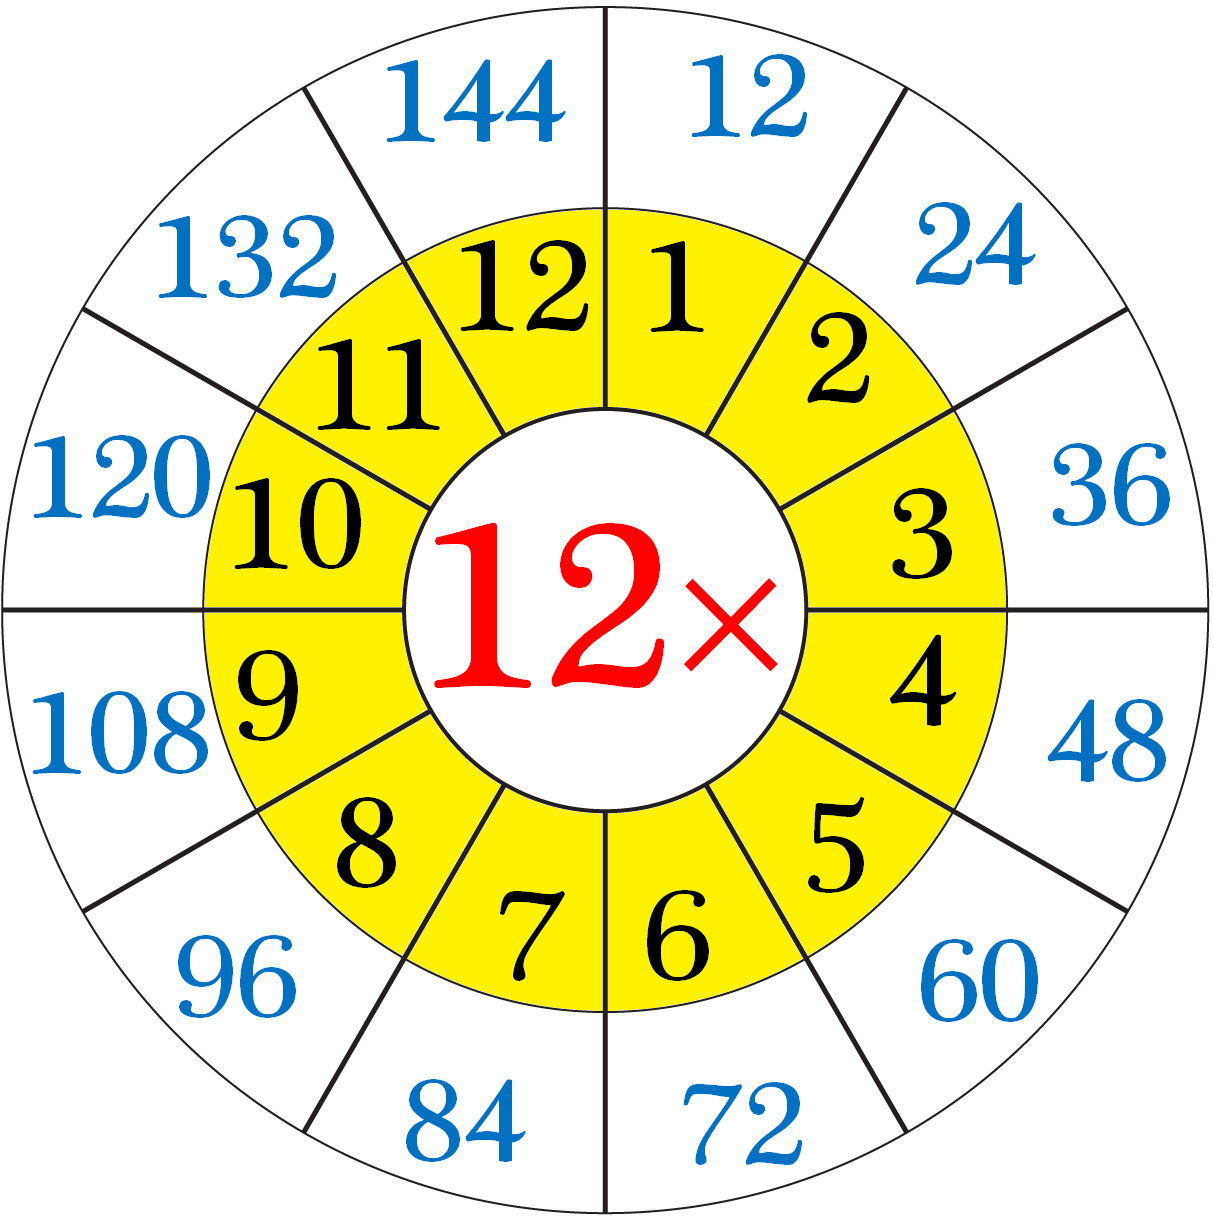 multiplication-table-of-12-read-and-write-the-table-of-12-eight-times-twelve